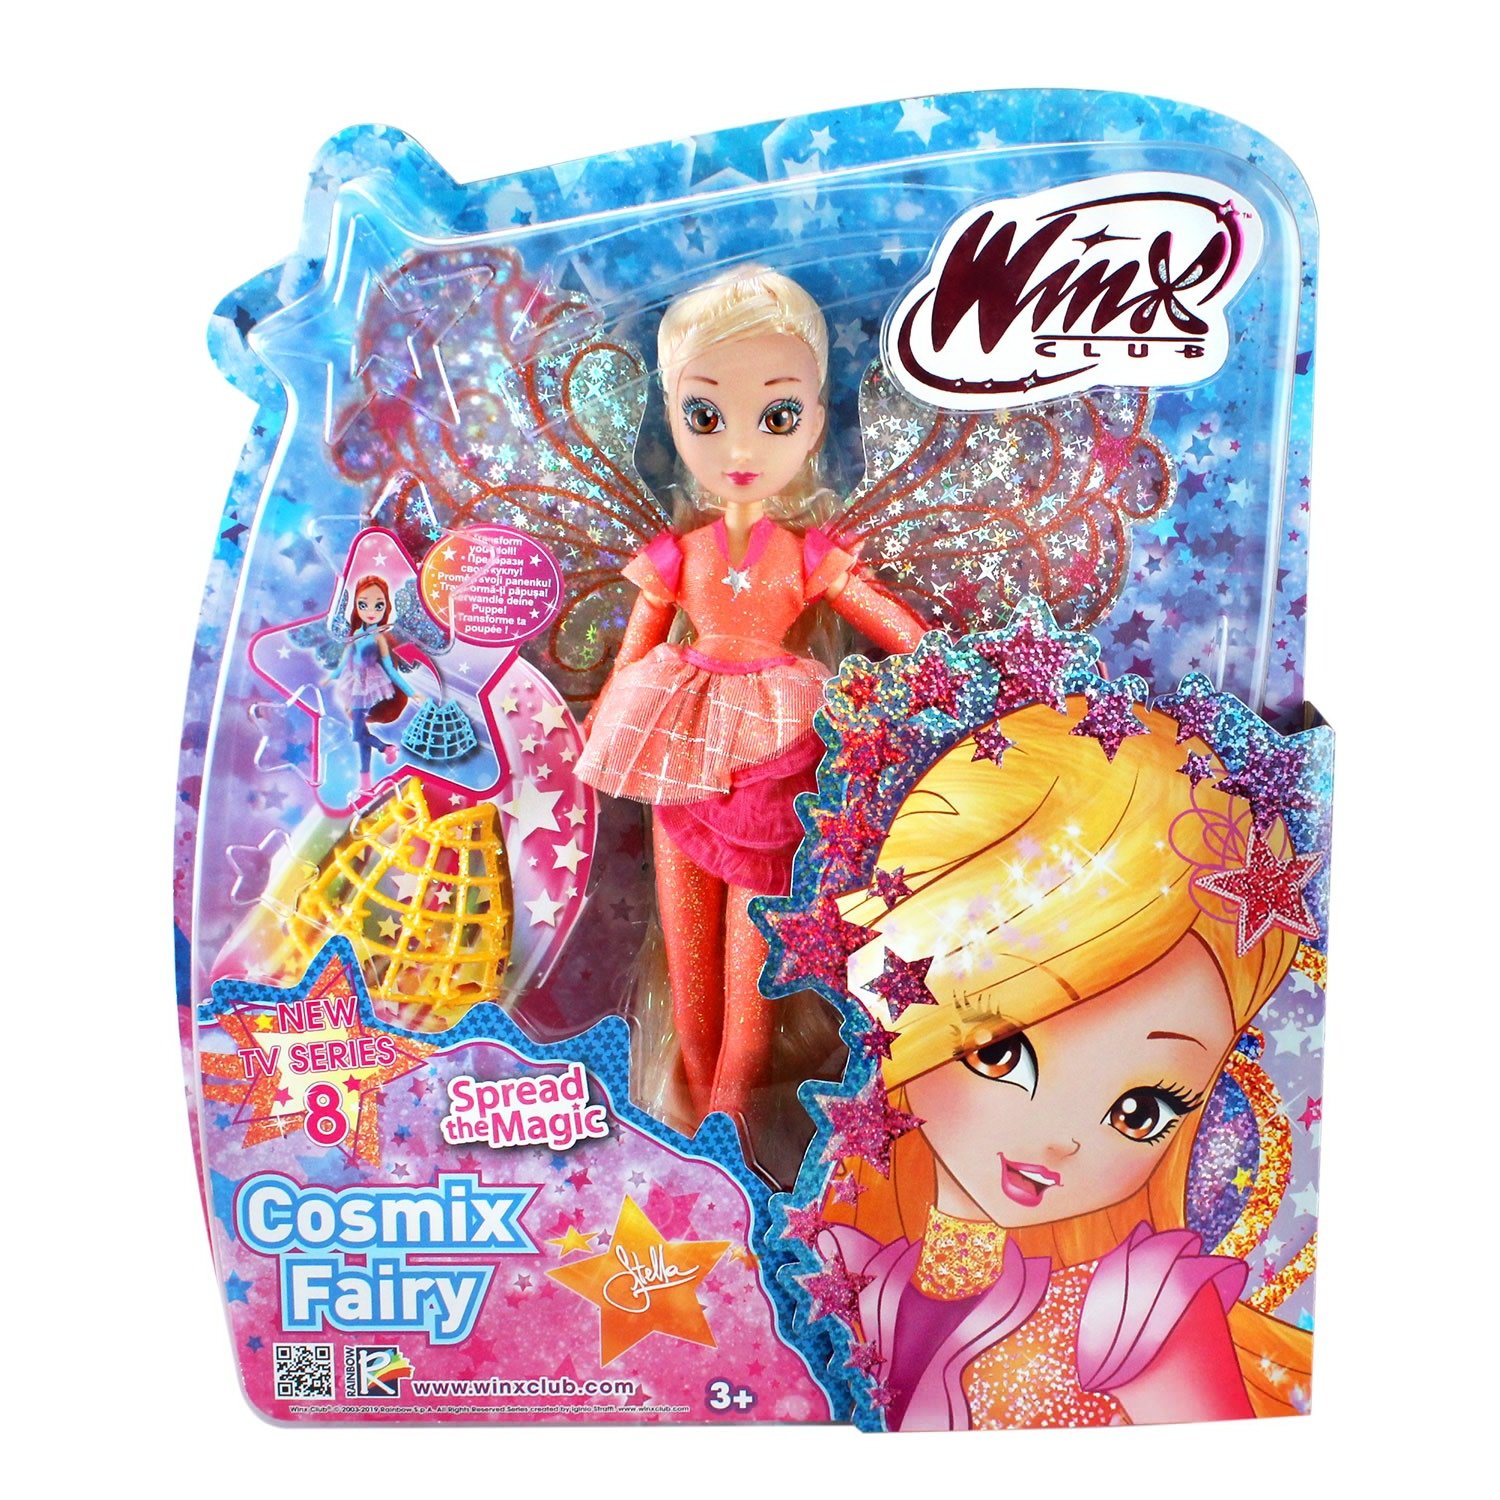 Winx Club All on Twitter: "In this thread I share links to pre-order the  new #Winx Season 8 dolls that go on sale in September in Italy. Don't miss  the opportunity to